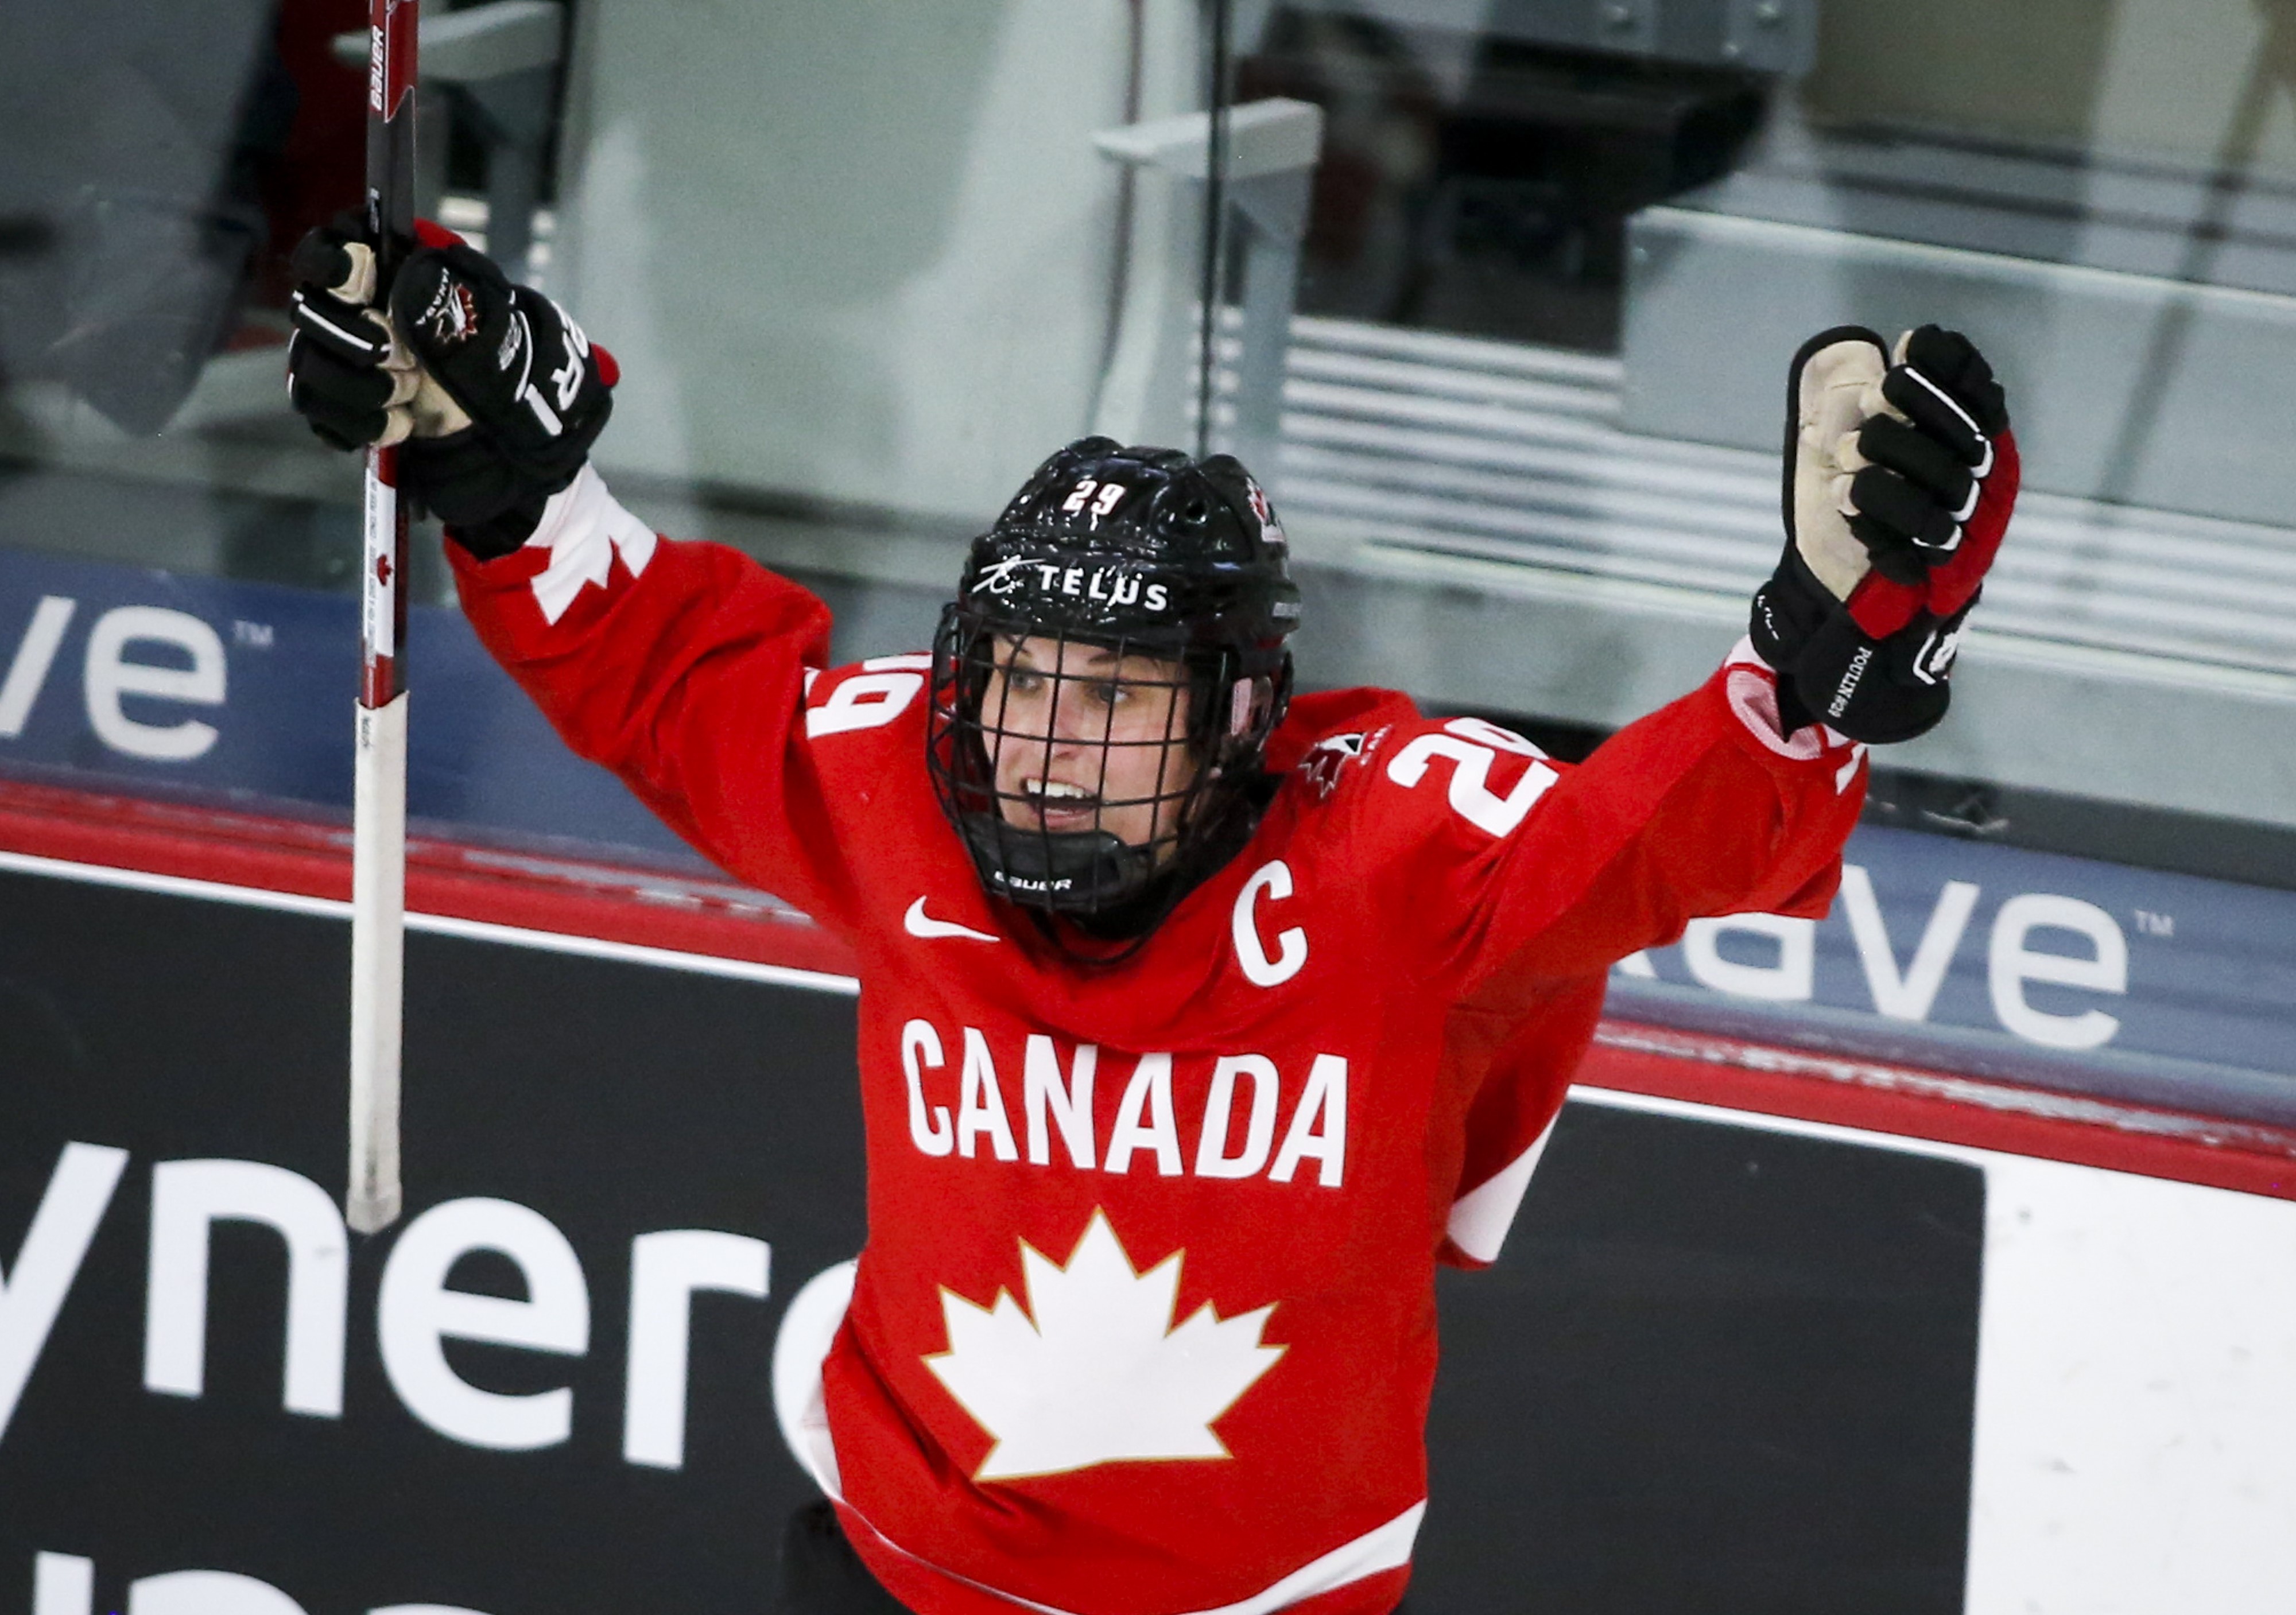 Canada defeats Finland in OT thriller for gold at world juniors in